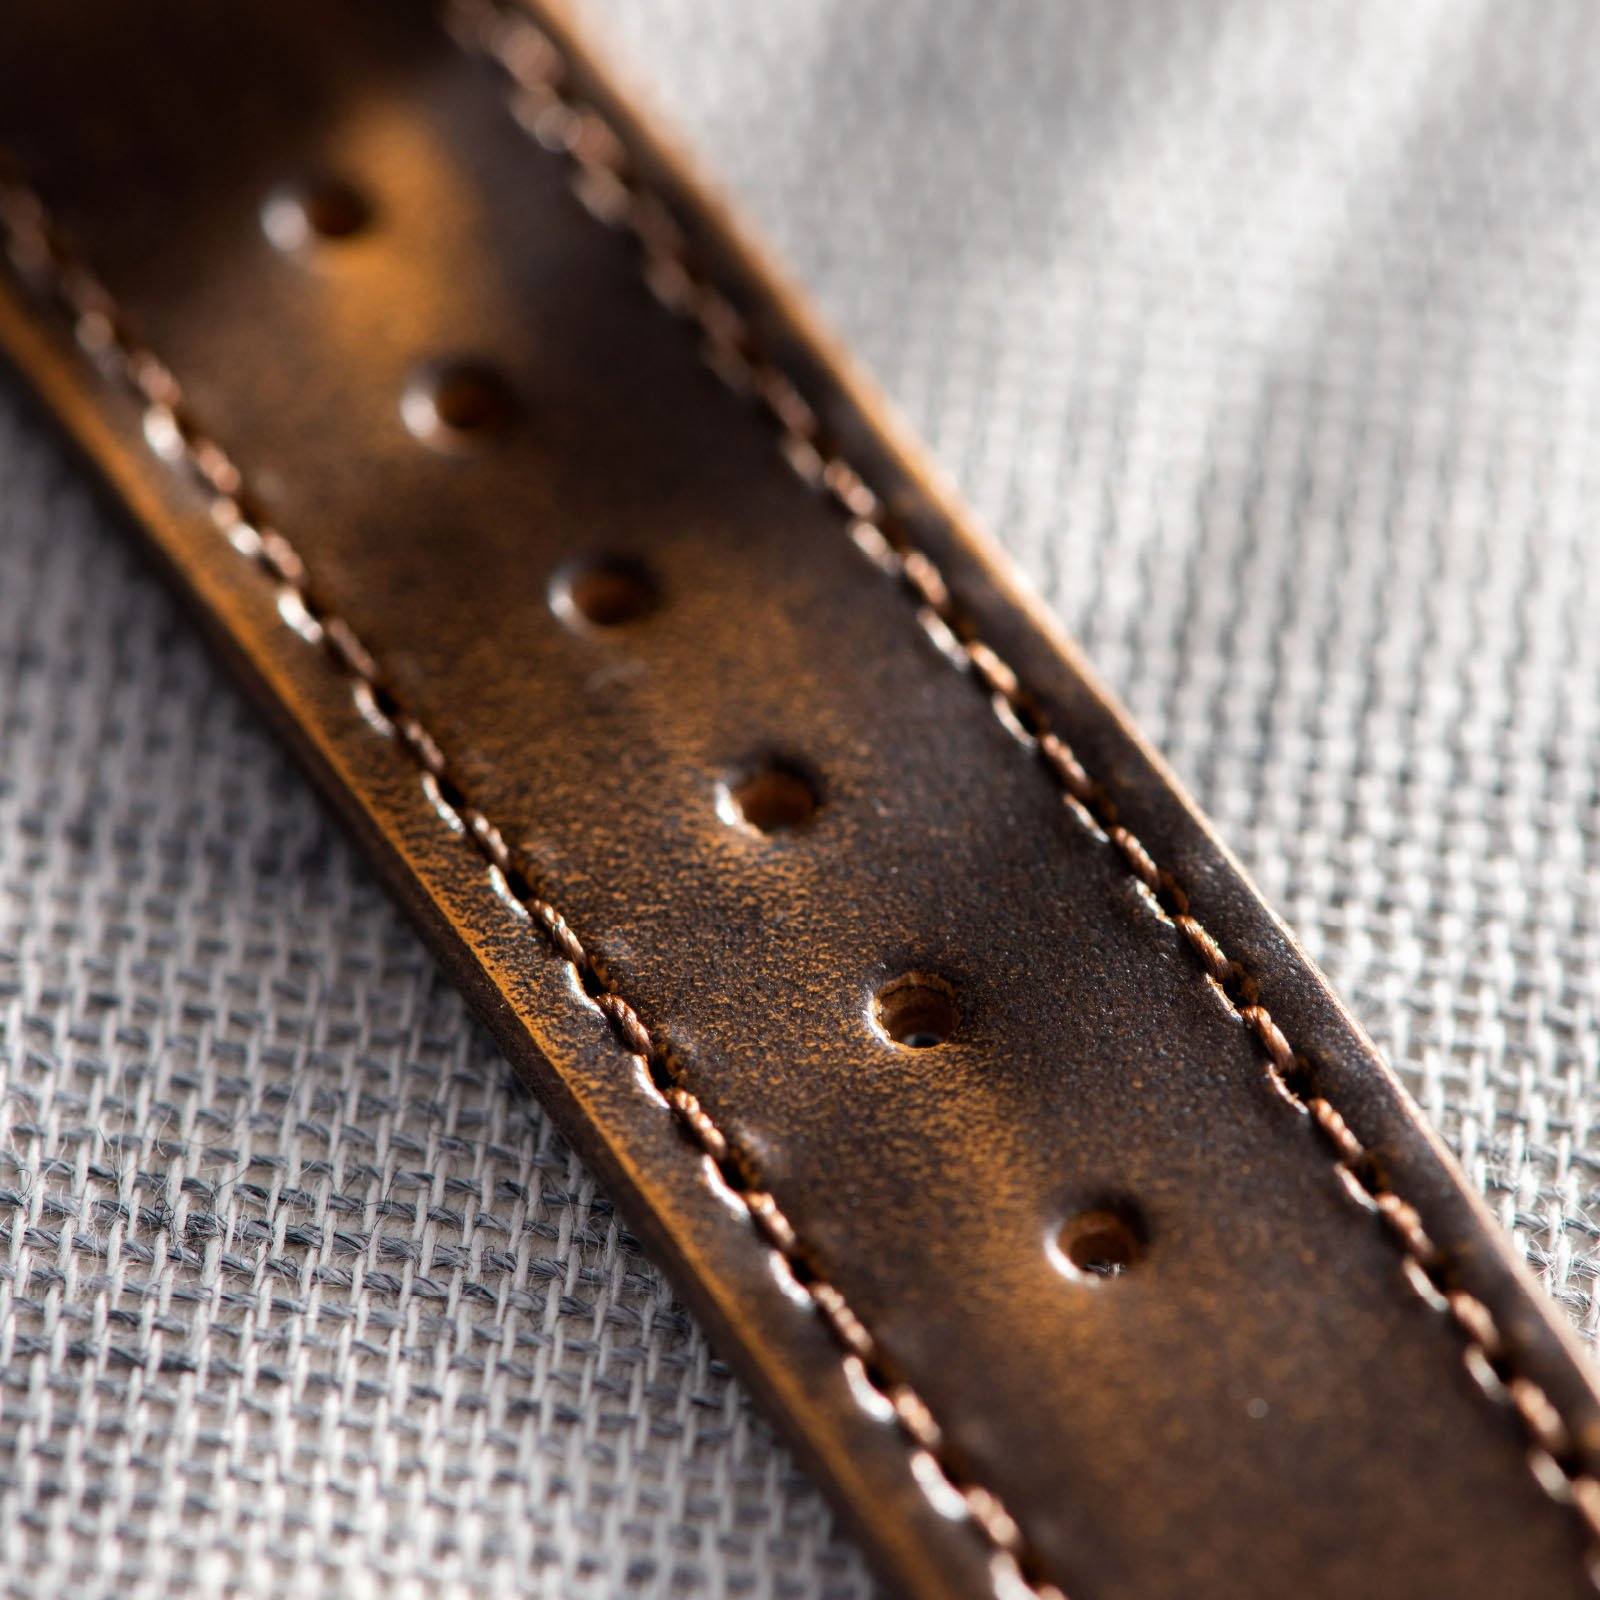 Degrade Honey Brown Leather Watch Strap